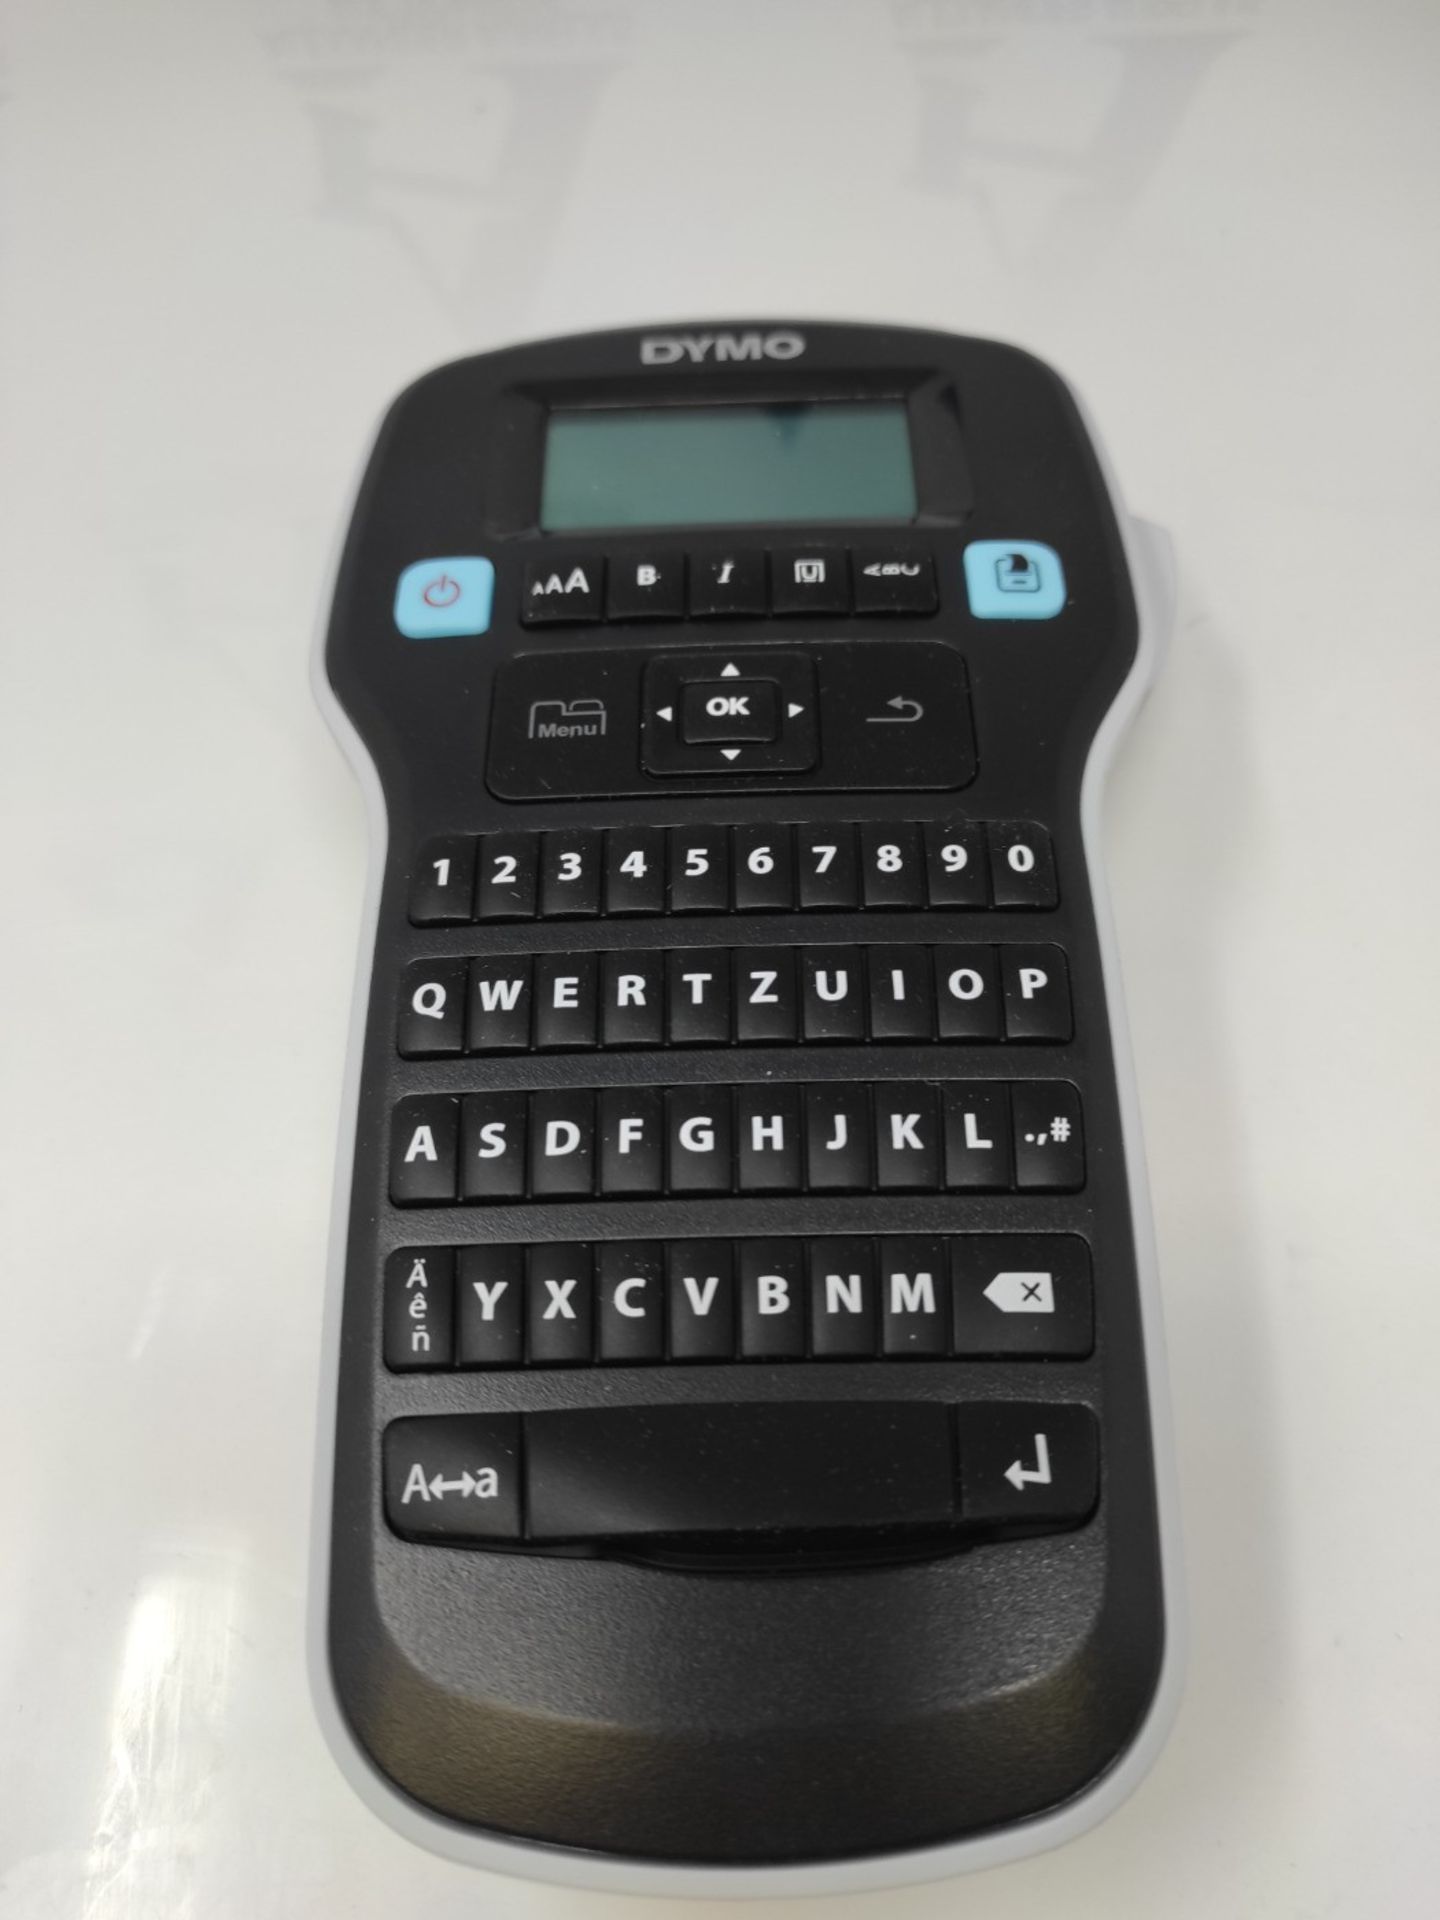 DYMO LabelManager 160 Portable Labeling Device | Labeling device with QWERTZ keyboard - Image 6 of 6